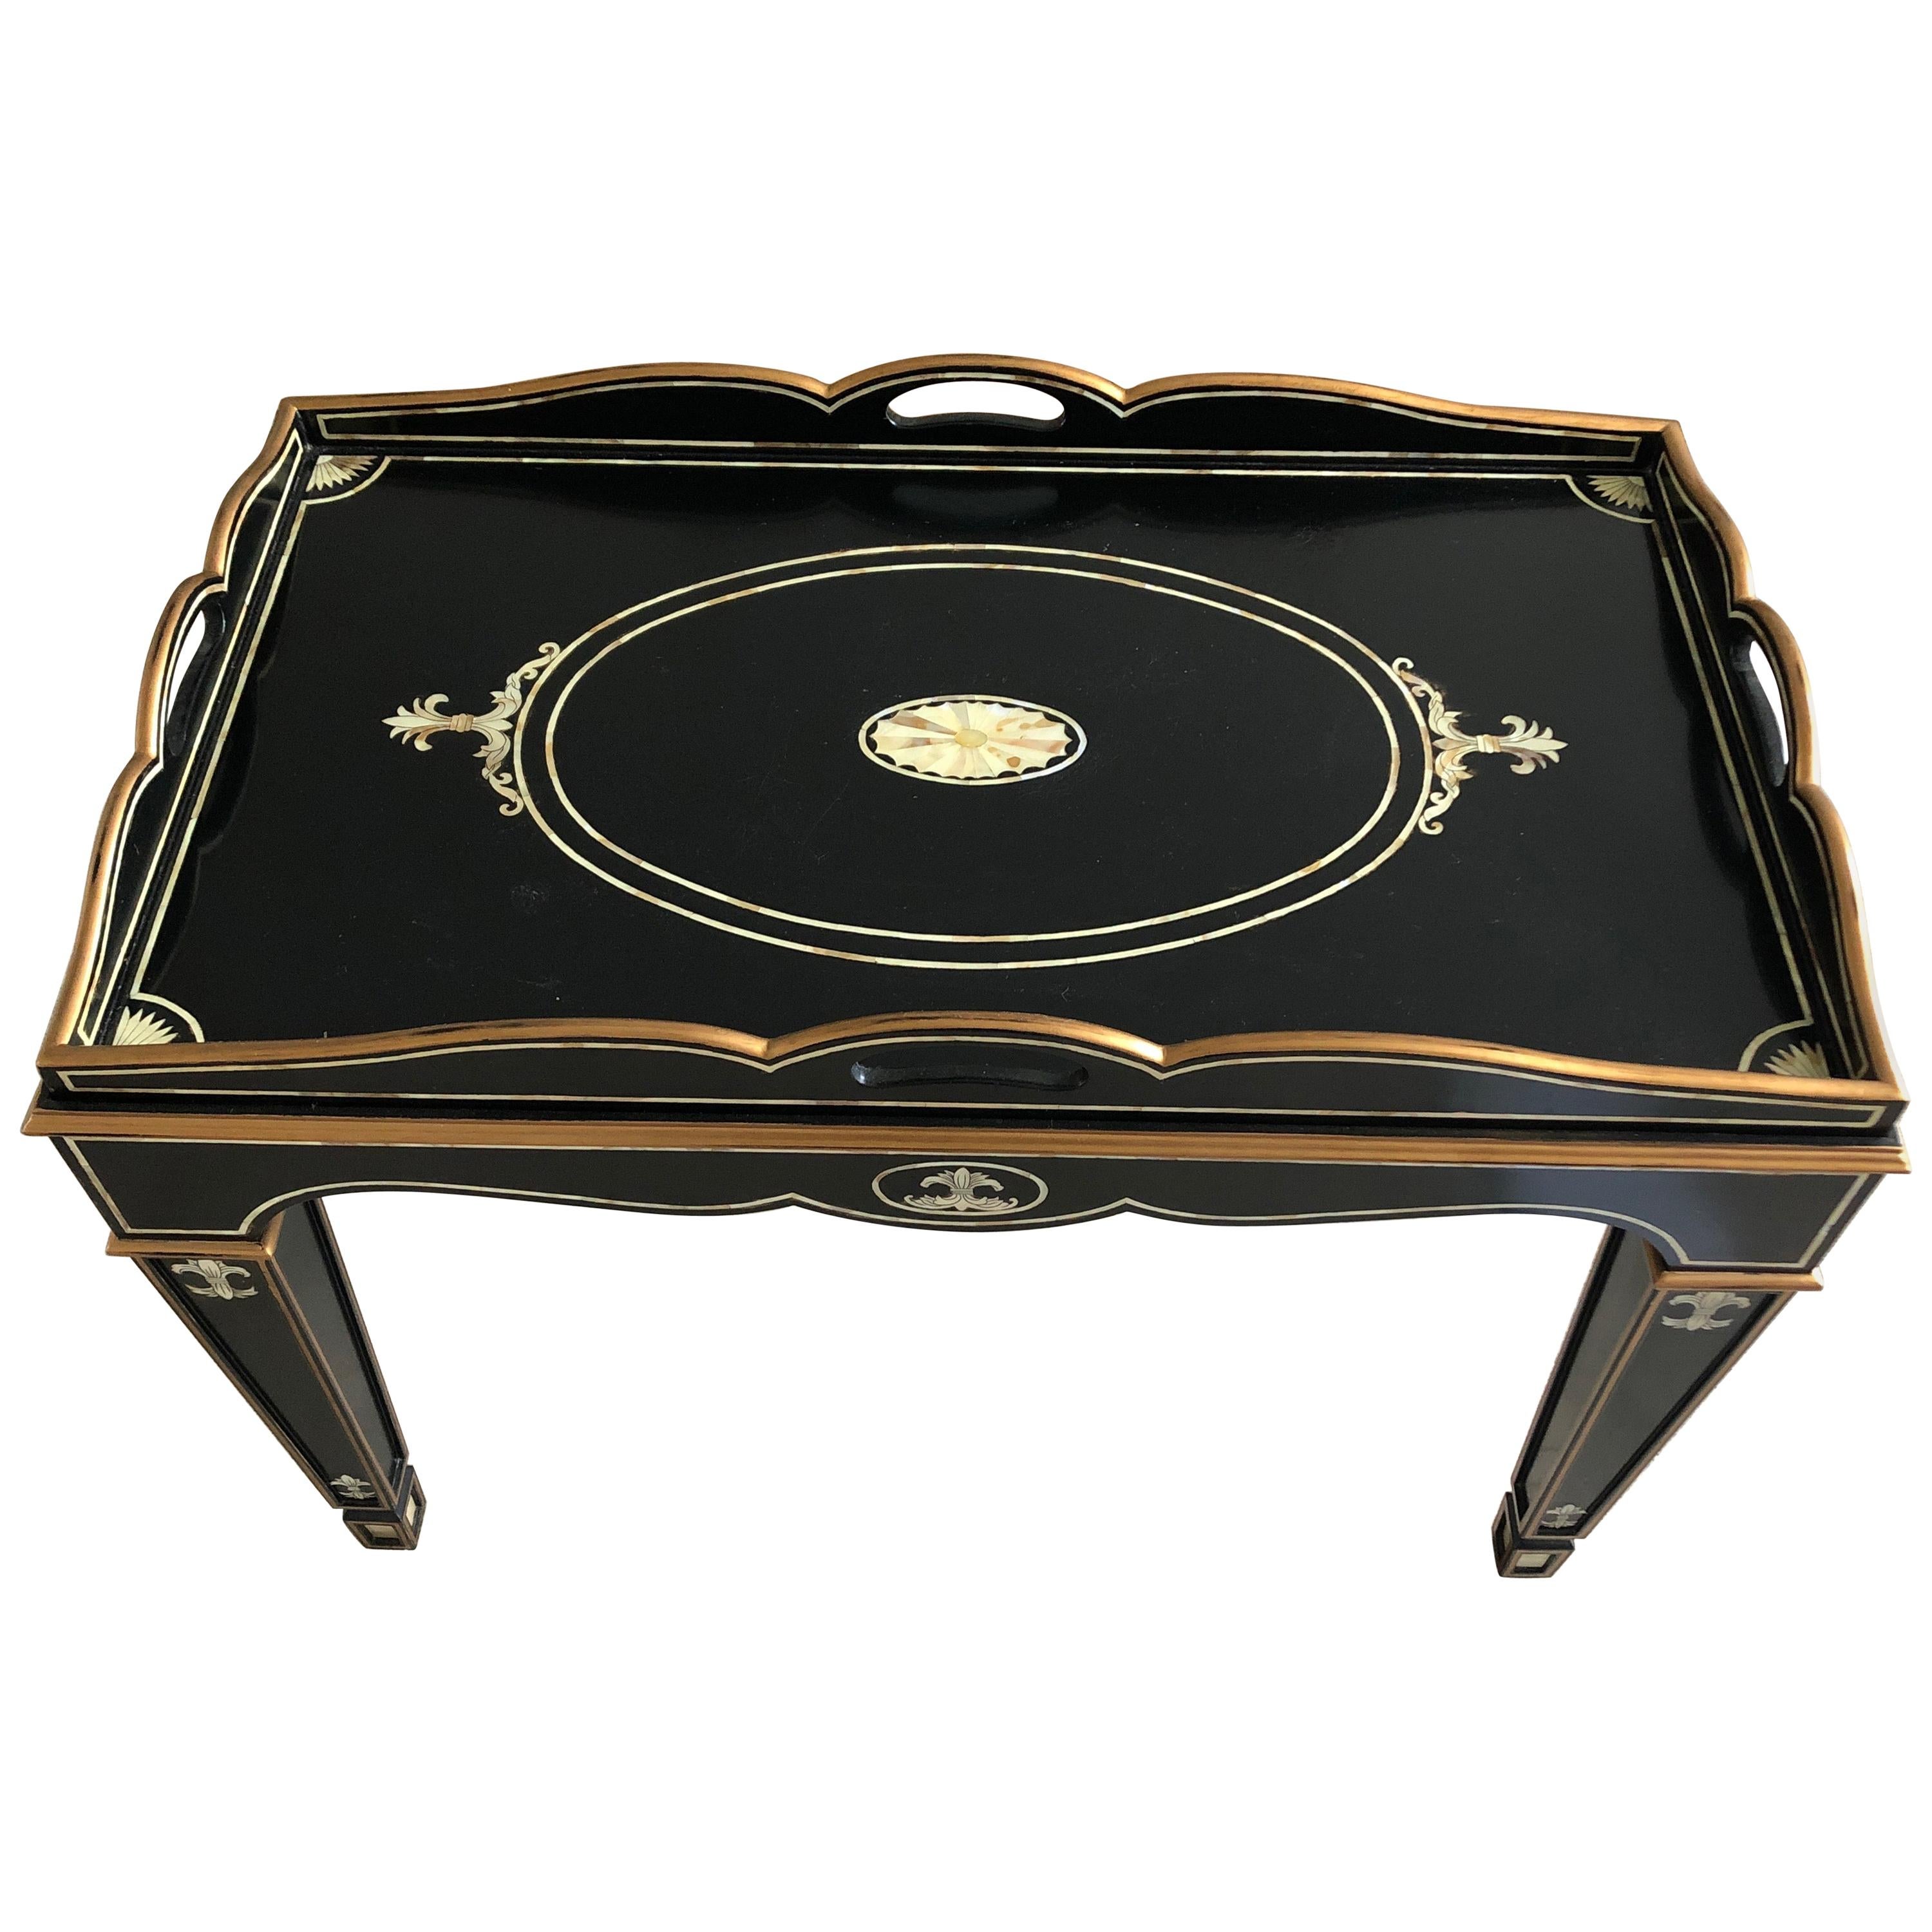 Gem of a Hollywood Regency Black White and Gold Small Sized Tray Coffee Table